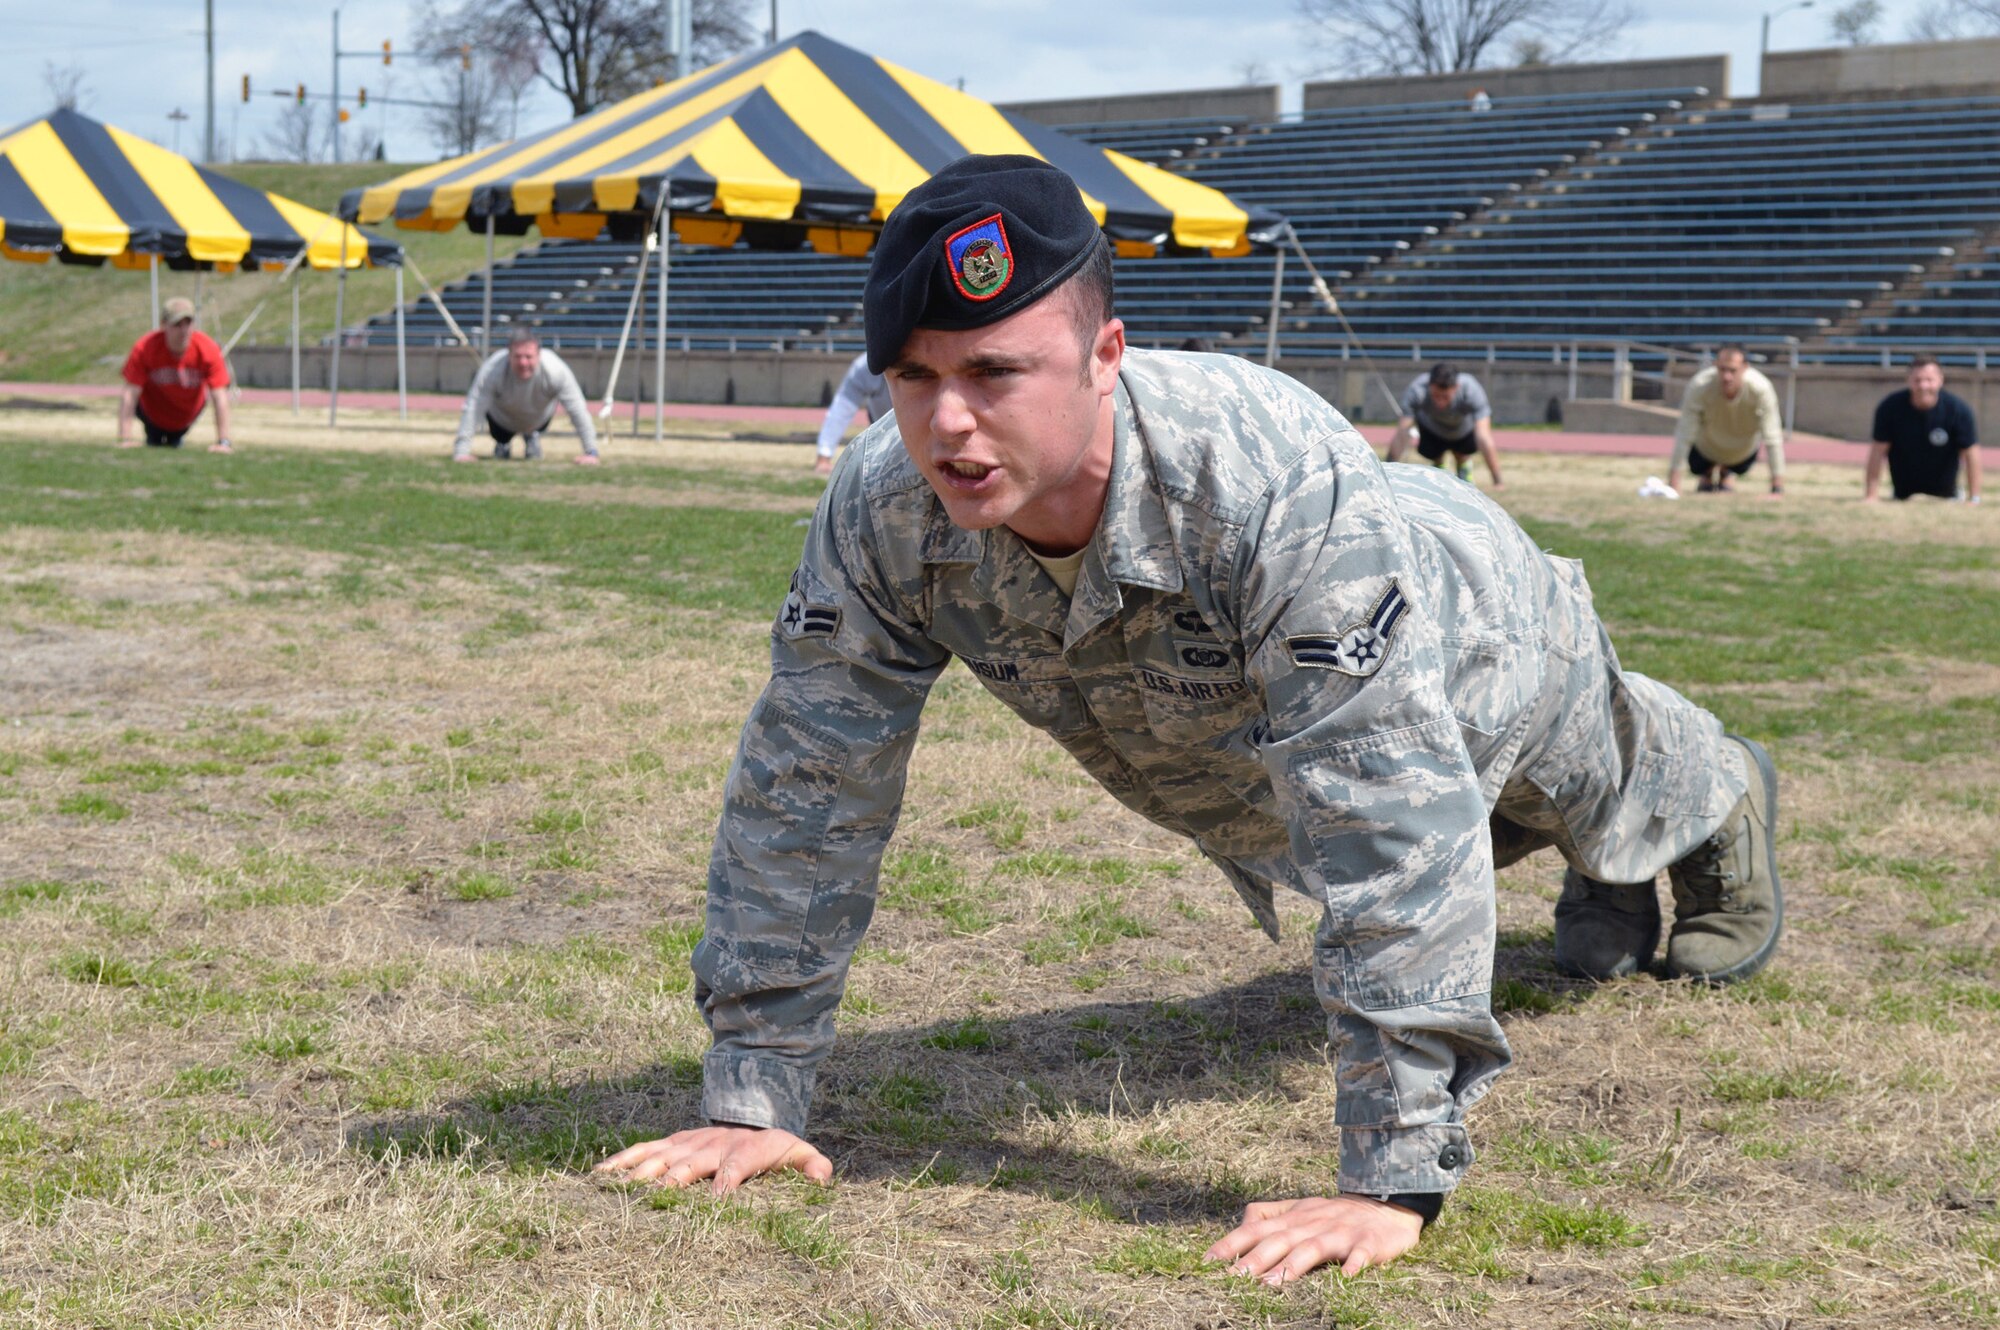 Airman 1st Class Brian Musum, 14th Air Support Operations Squadron, leads Pope Field Tactical Air Control Party airmen during a memorial push up ceremony after a 24-hour run at the Hedrick Stadium track during the third annual worldwide TACP 24-hour Run Challenge fundraising event on March 28. The event is held to honor and raise funds for fallen TACP brothers in arms and their families. TACP airmen from the 18th Air Support Operations Group, 14th Air Support Operations Squadron, 682nd Air Support Operations Squadron and the 18th Weather Squadron accumulated over 2,500 miles during this year’s event at Pope. (U.S. Air Force photo/Marvin Krause)